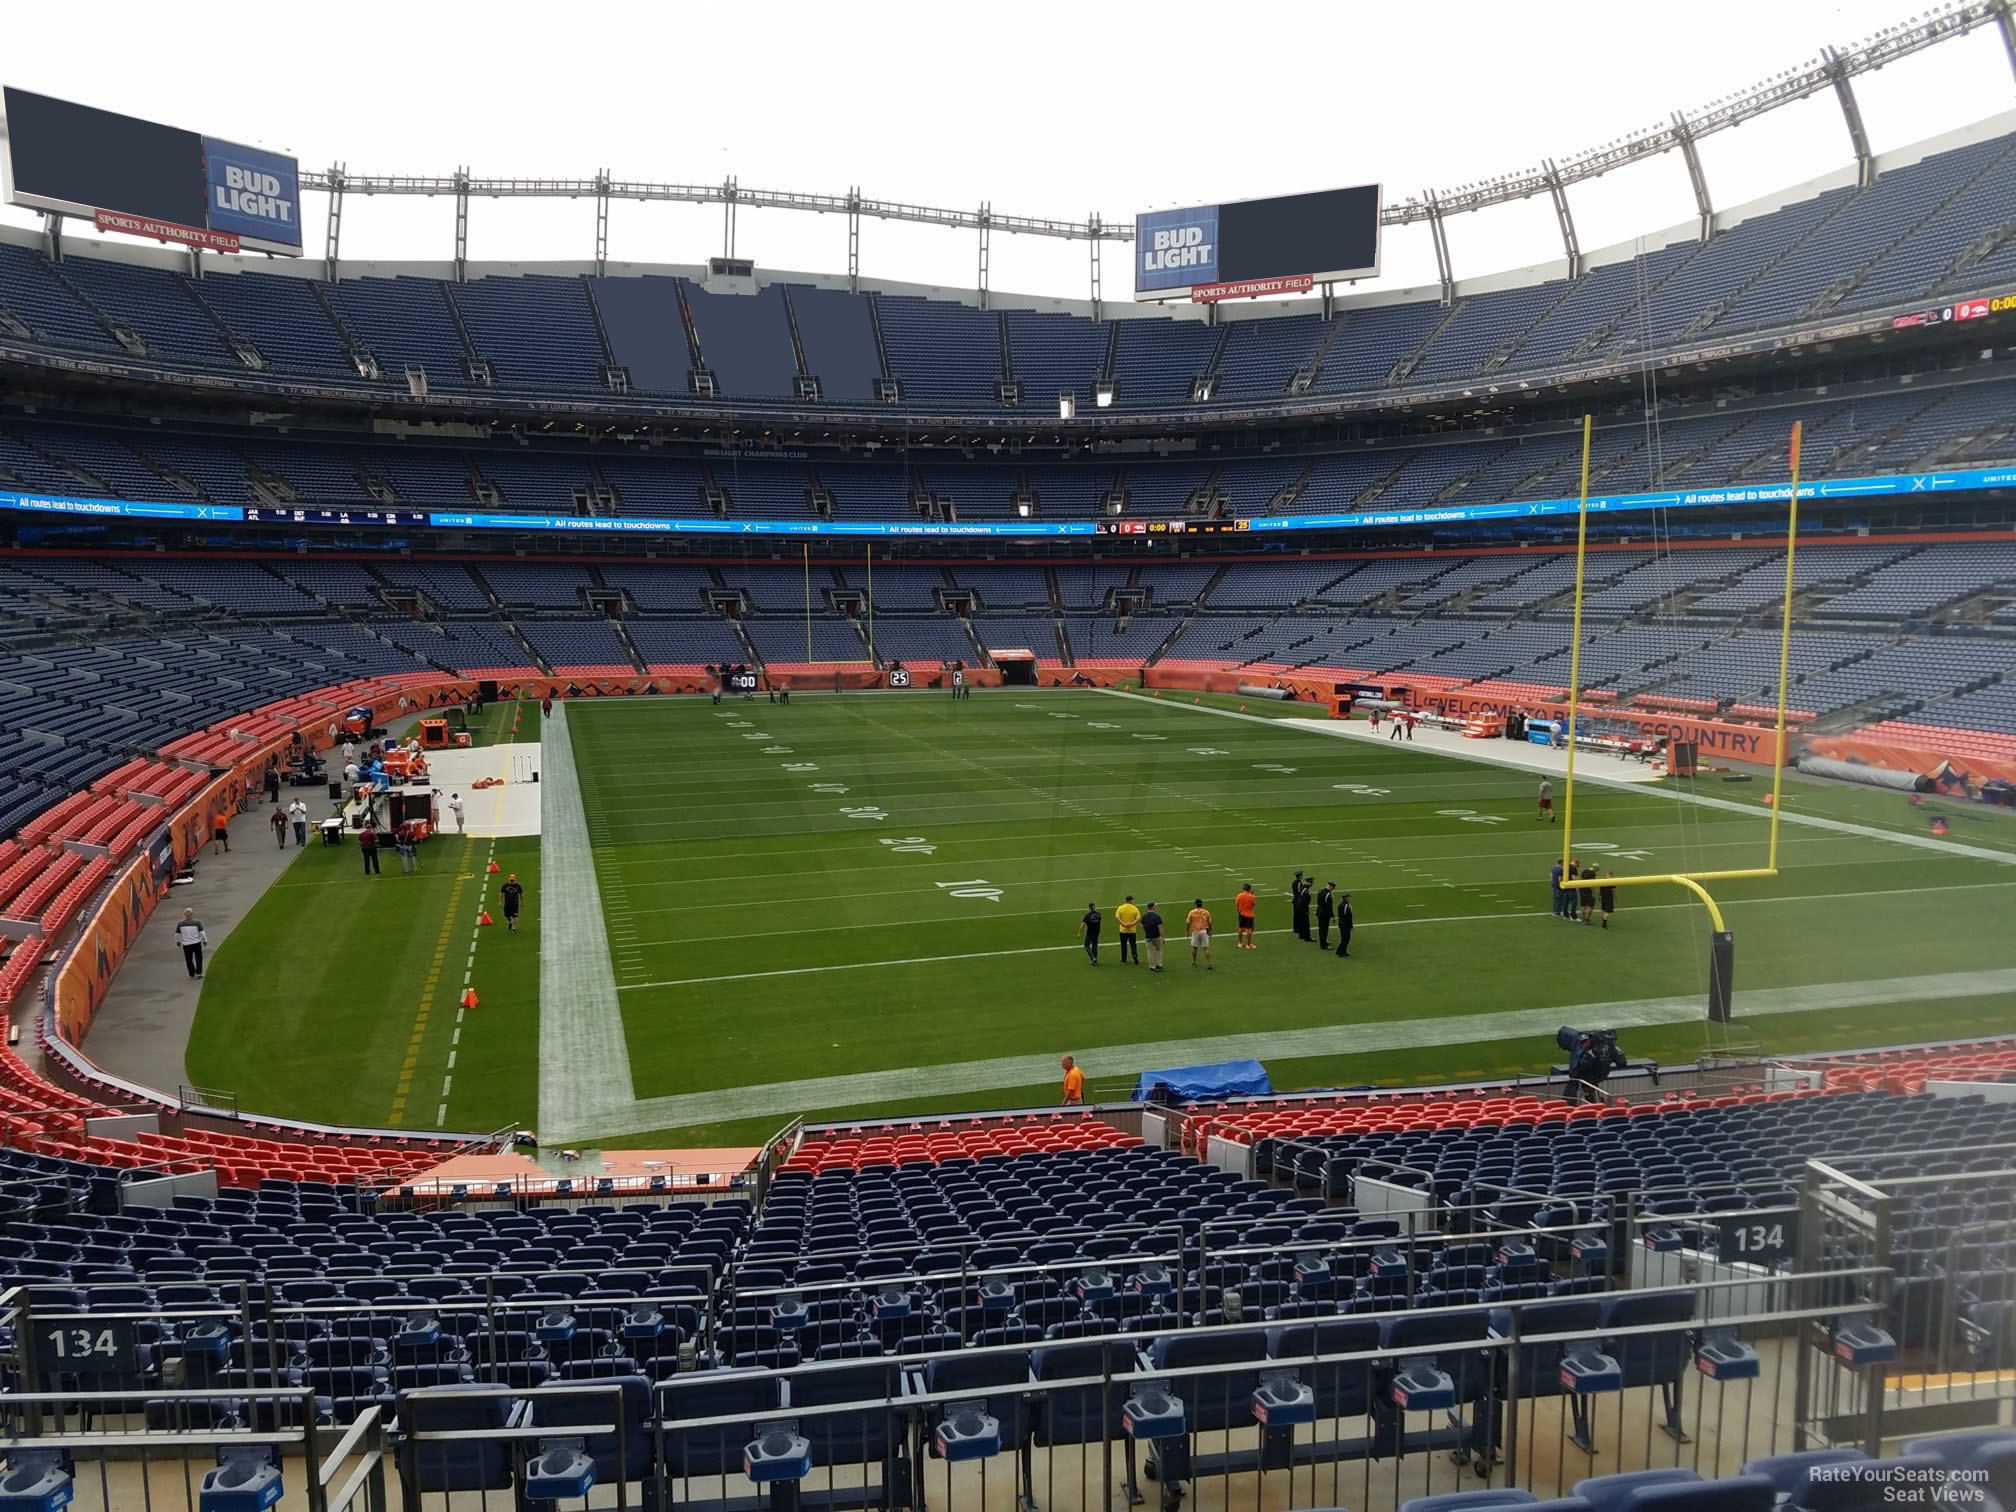 section 134, row 30 seat view  - empower field (at mile high)